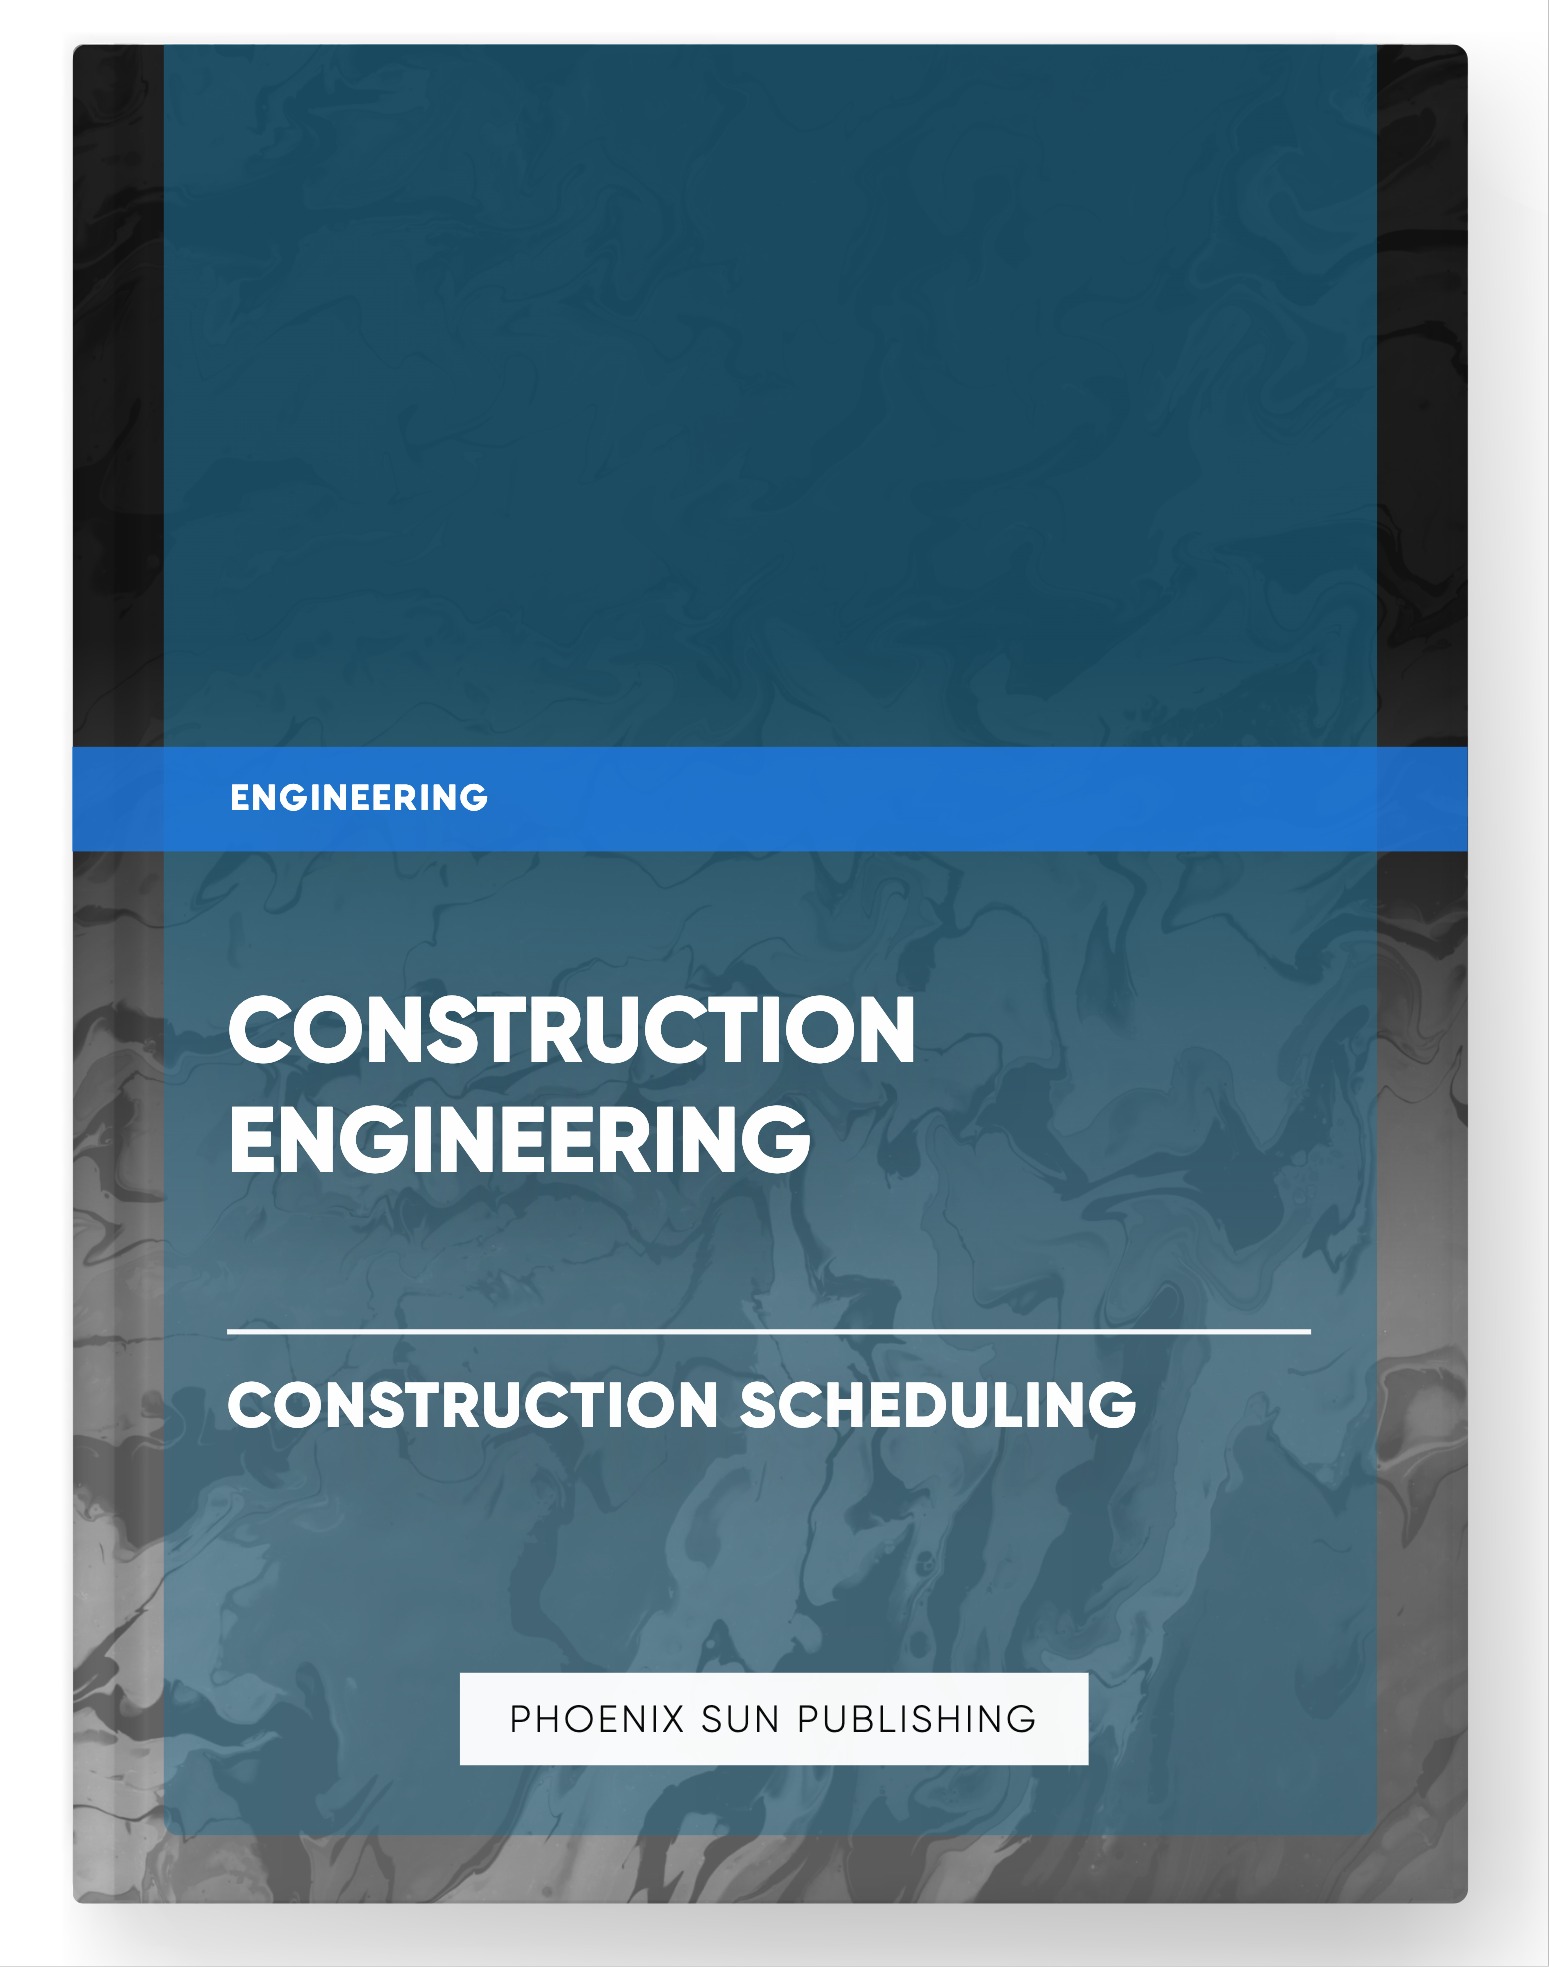 Construction Engineering – Construction Scheduling